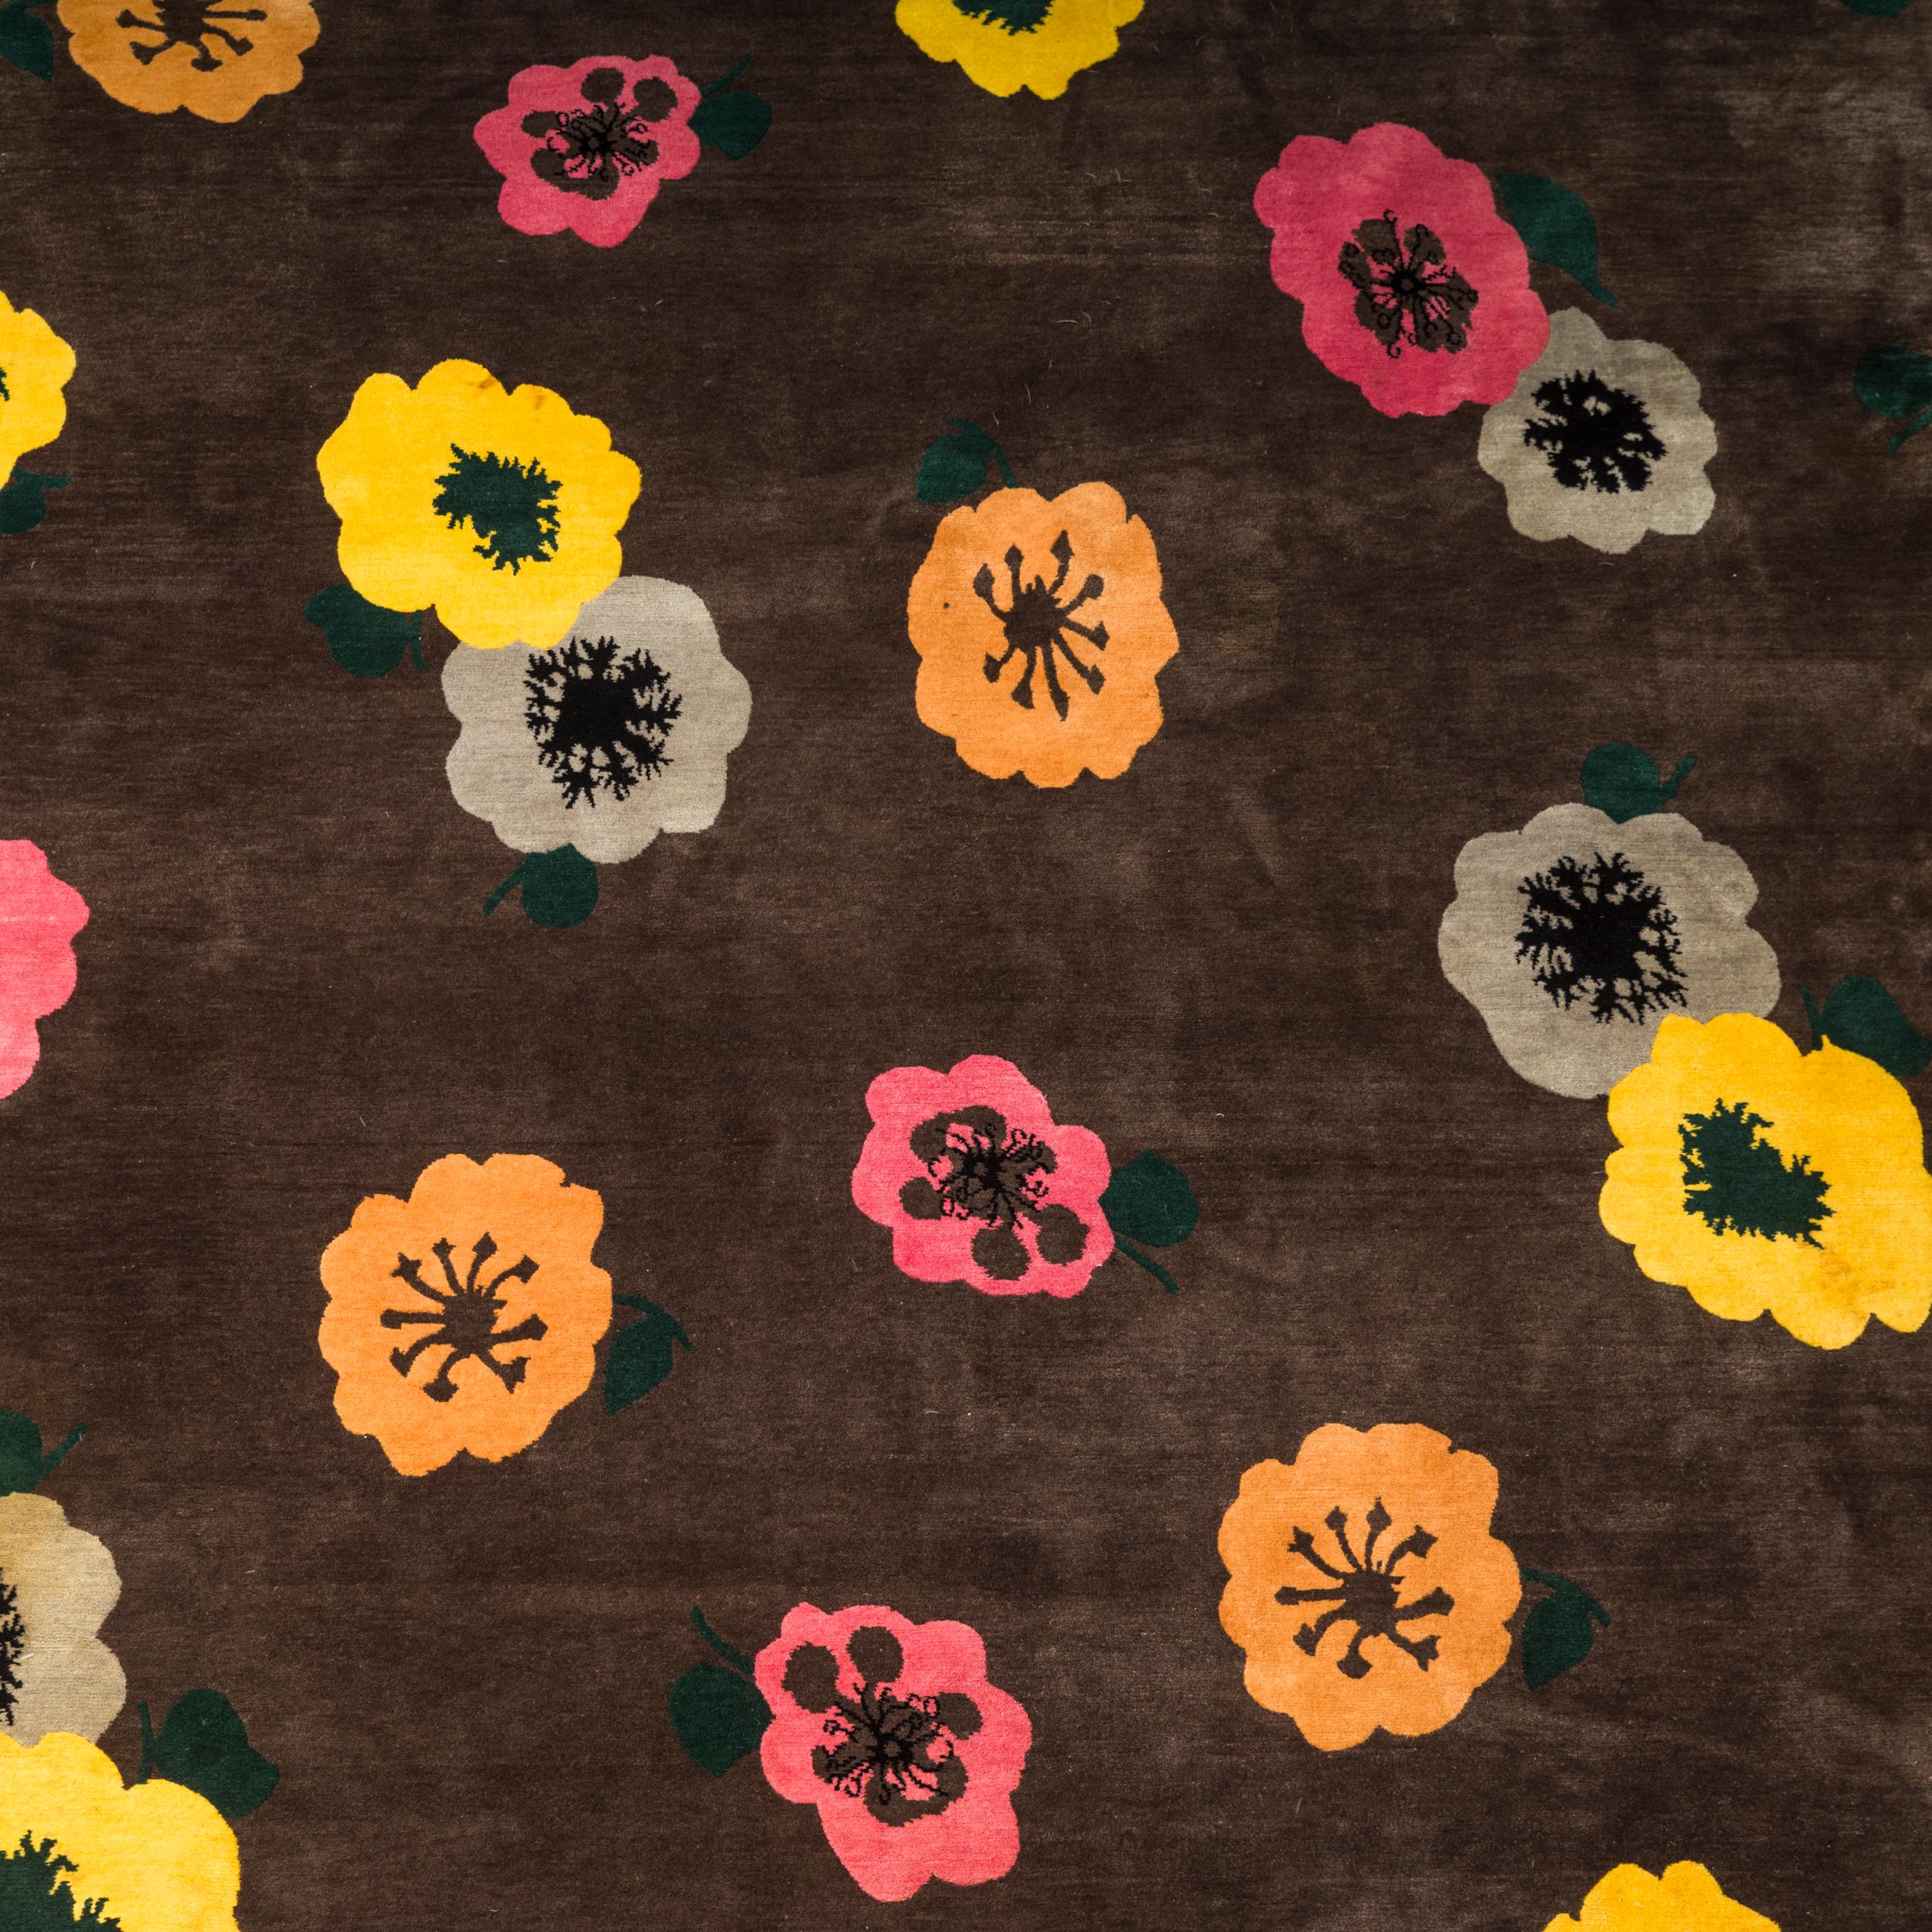 Since opening in 1997, The Rug Company has become synonymous with luxury rug design and well known for their collaborations with leading creatives, including design houses and artists.

This Anemone Cocoa rug was the first collaboration between the